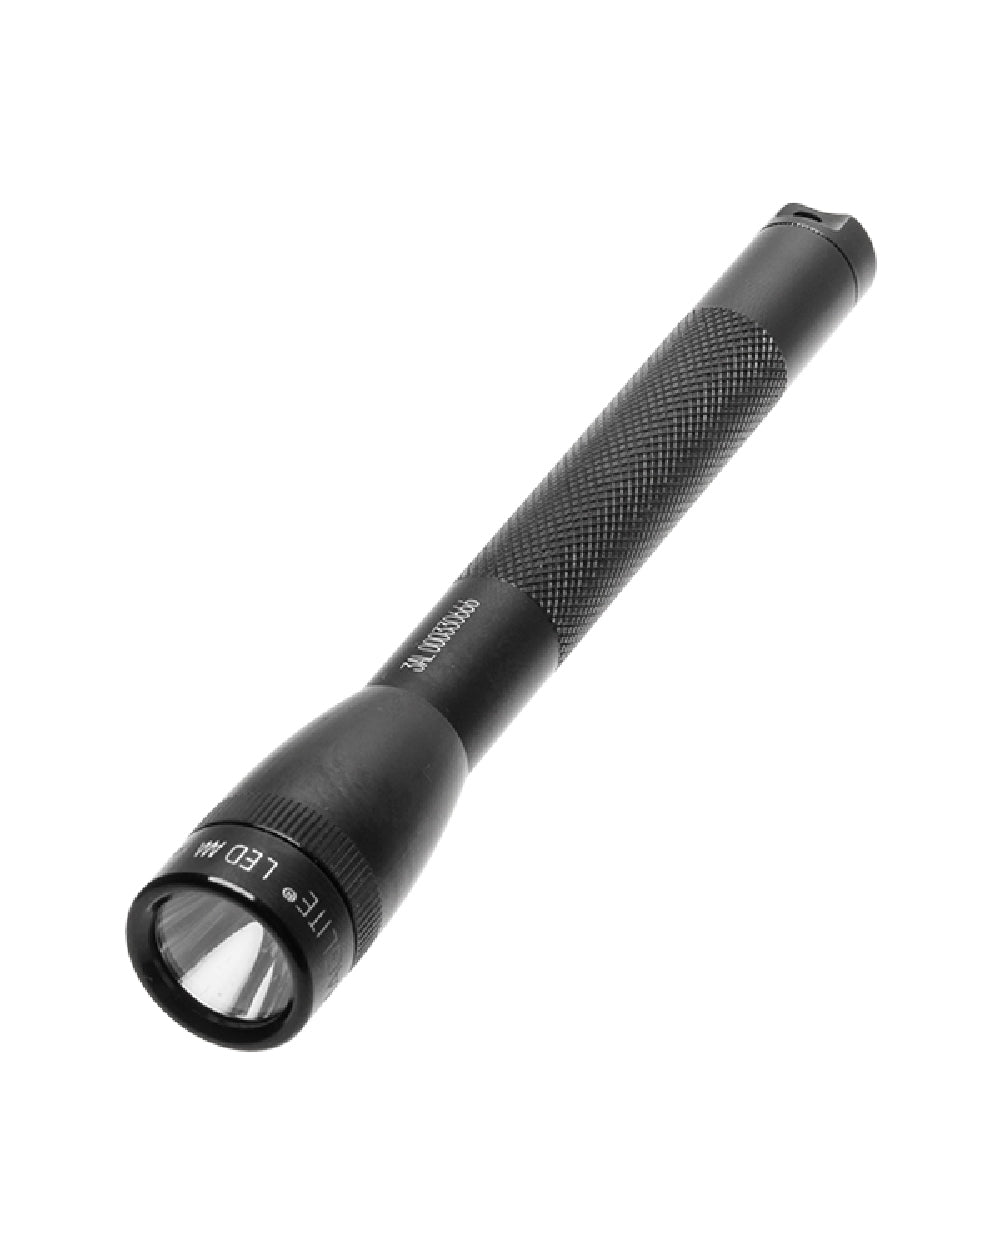 Maglite Mini 2-Cell AAA LED Torch in Black 